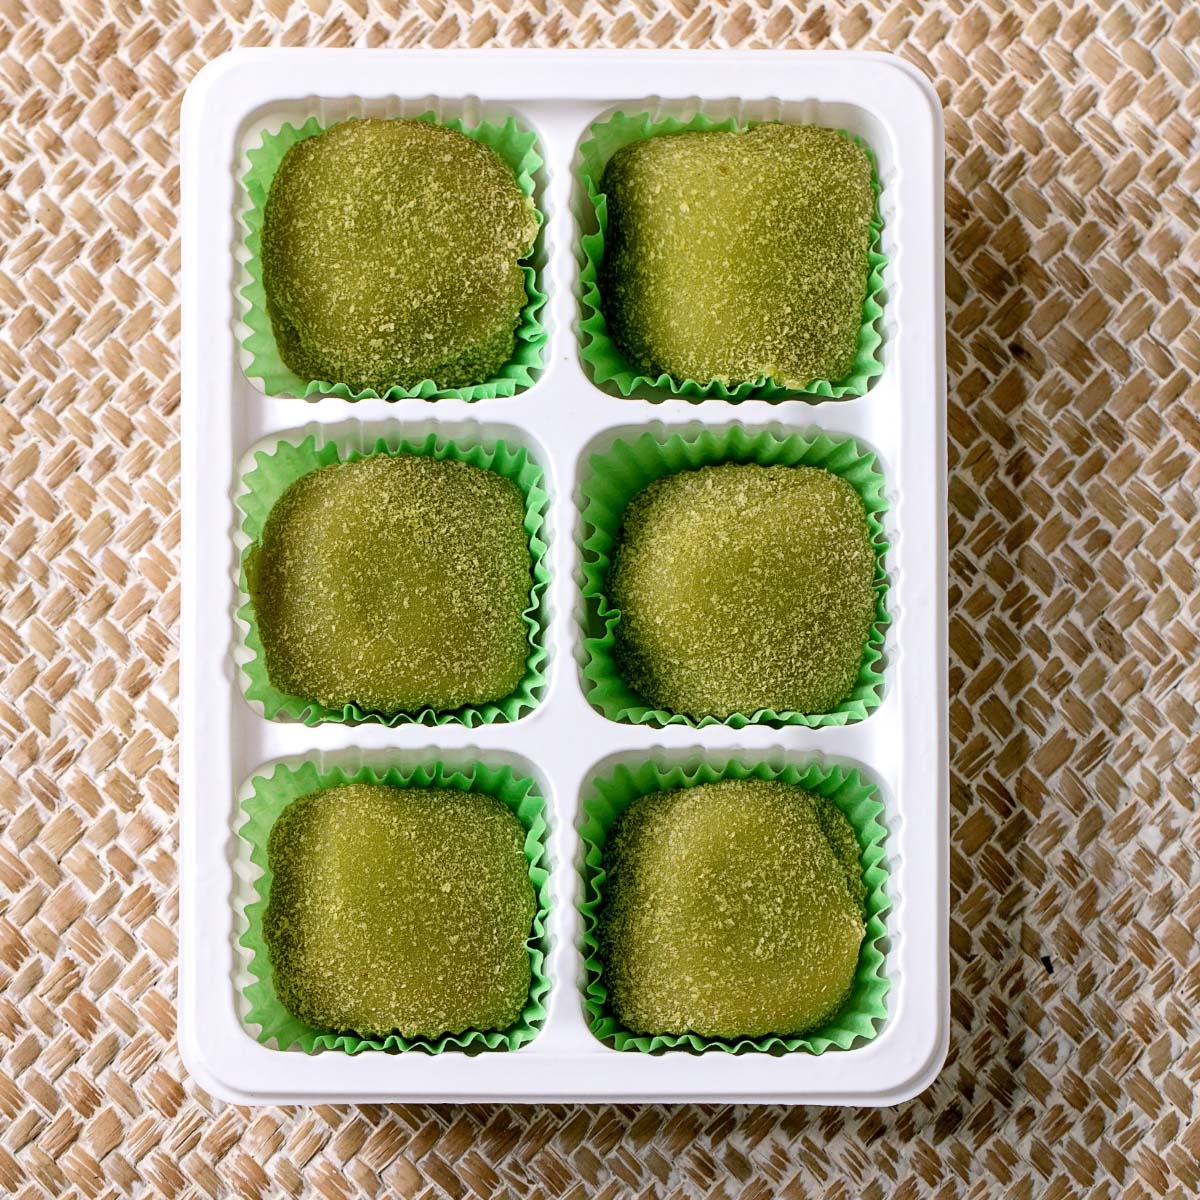 Mochi is made of Mochigome (糯米), a type of short-grain, japonica glutinous rice that is ground, steamed, and pounded sticky.